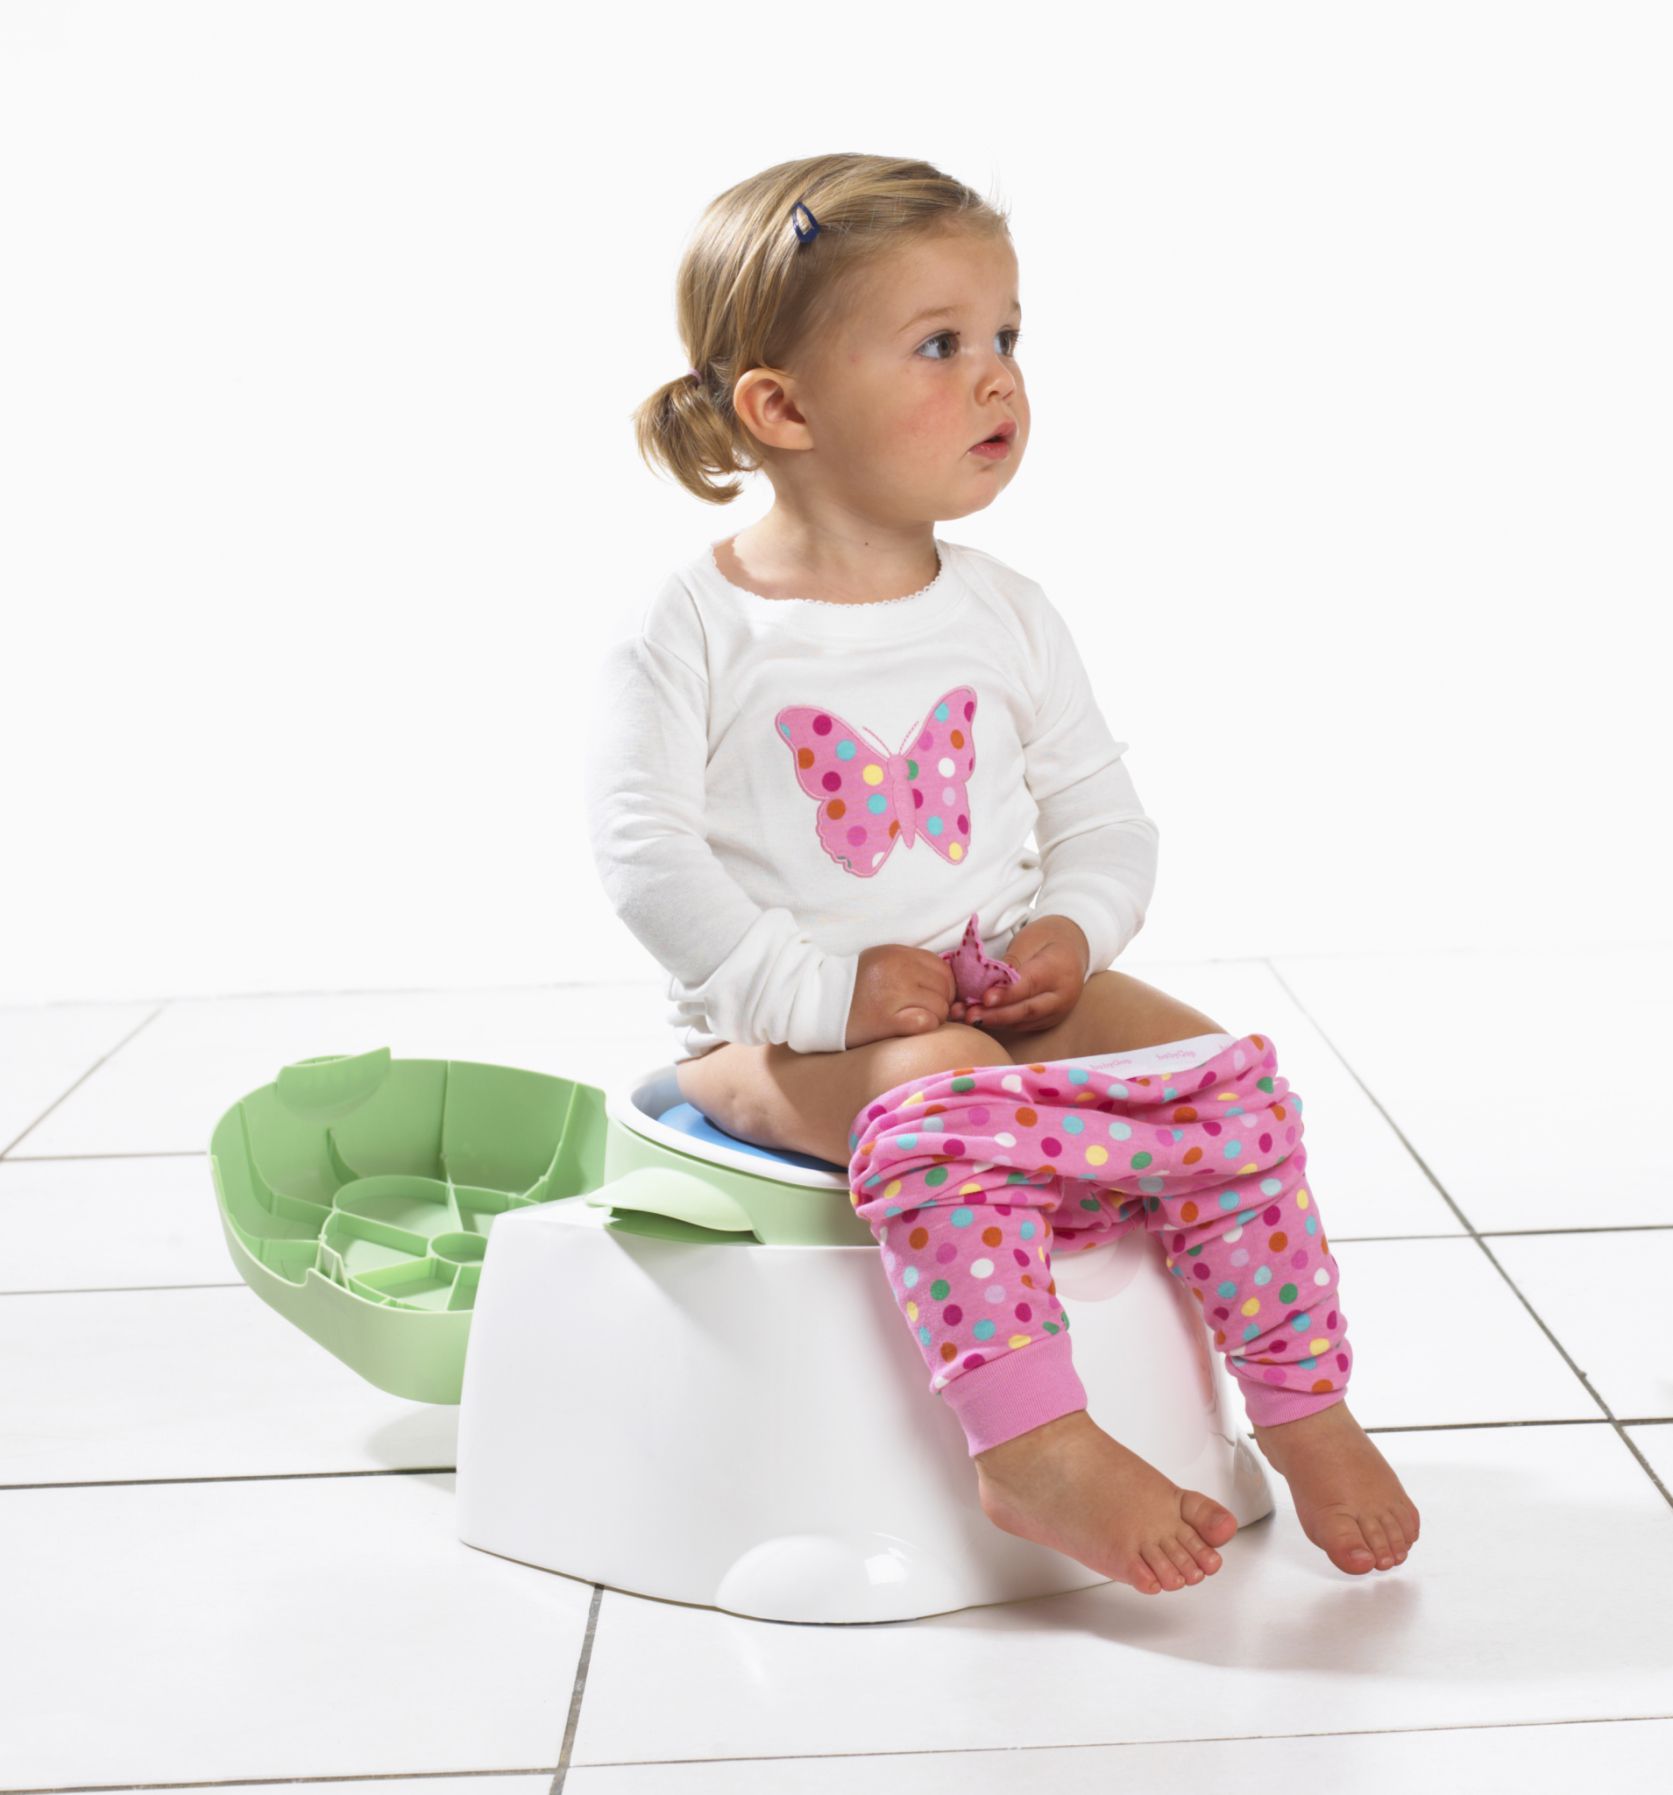 Help! Potty Training a 20-Month-Old Girl